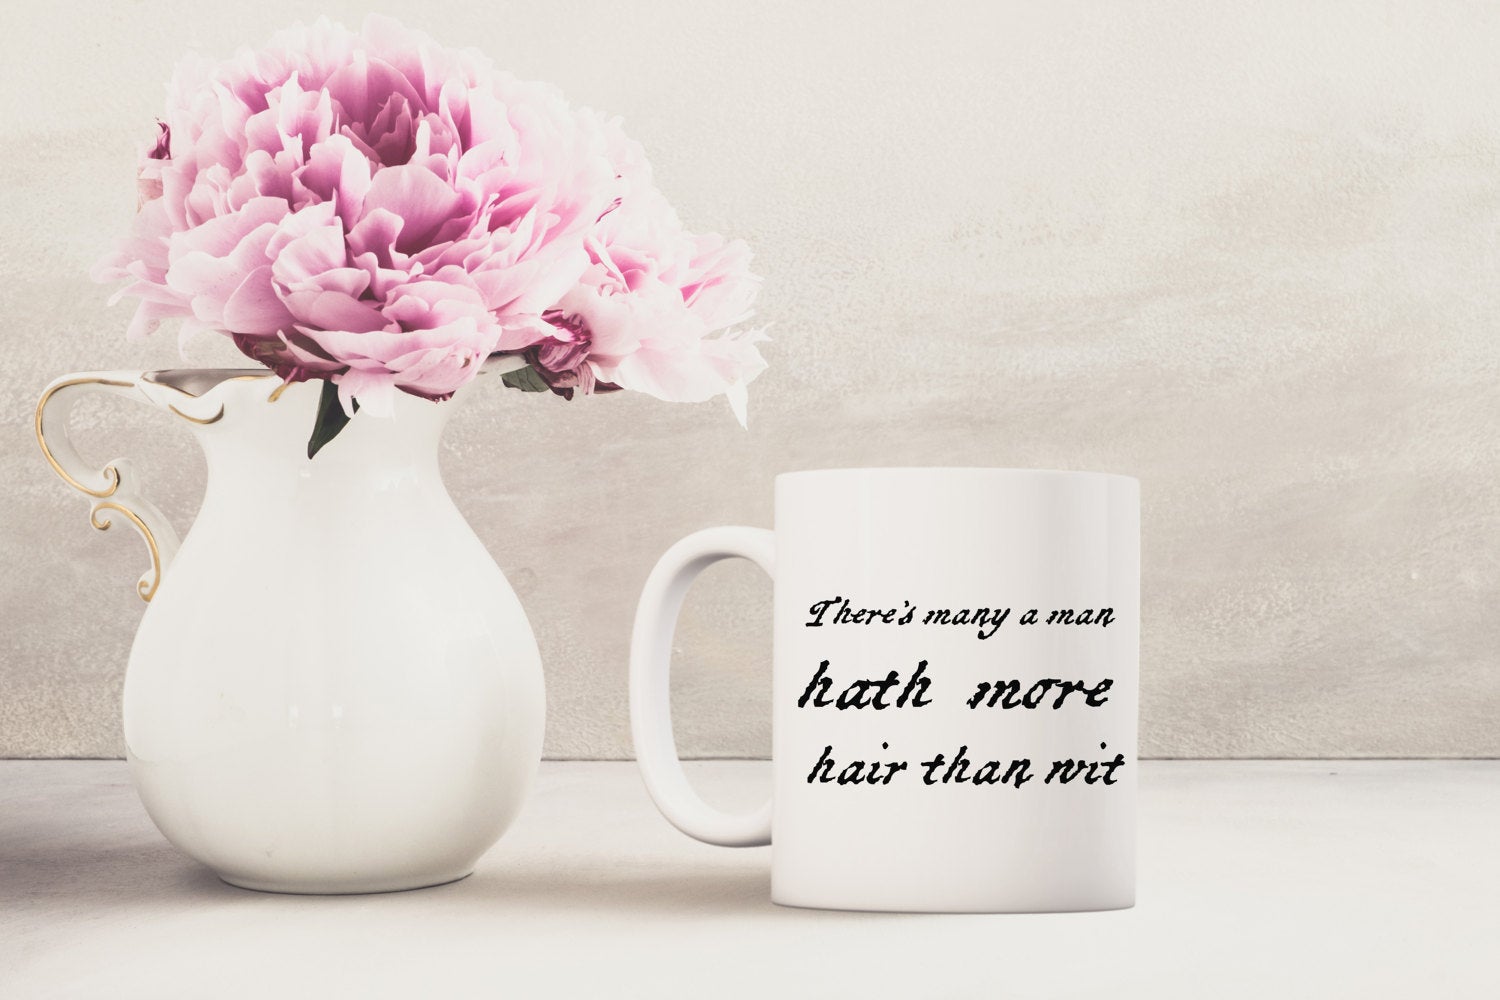 Shakespeare Funny Quote Coffee Mug, There's Many A Man Hath More Hair Than Wit, The Comedy of Errors